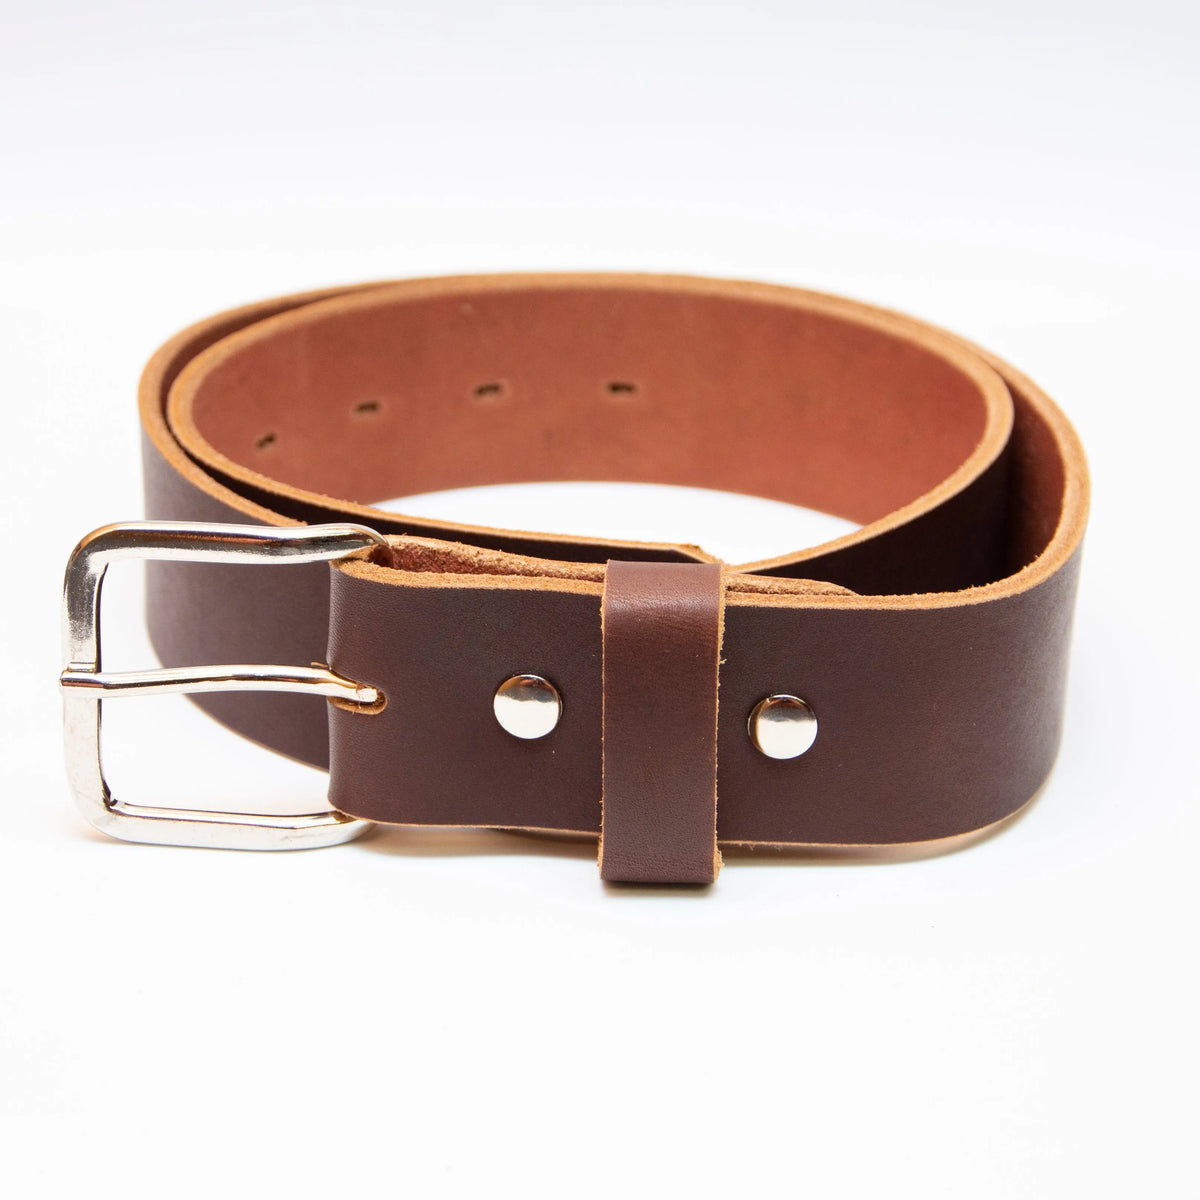 The No Buckle Belt - Main Street Forge